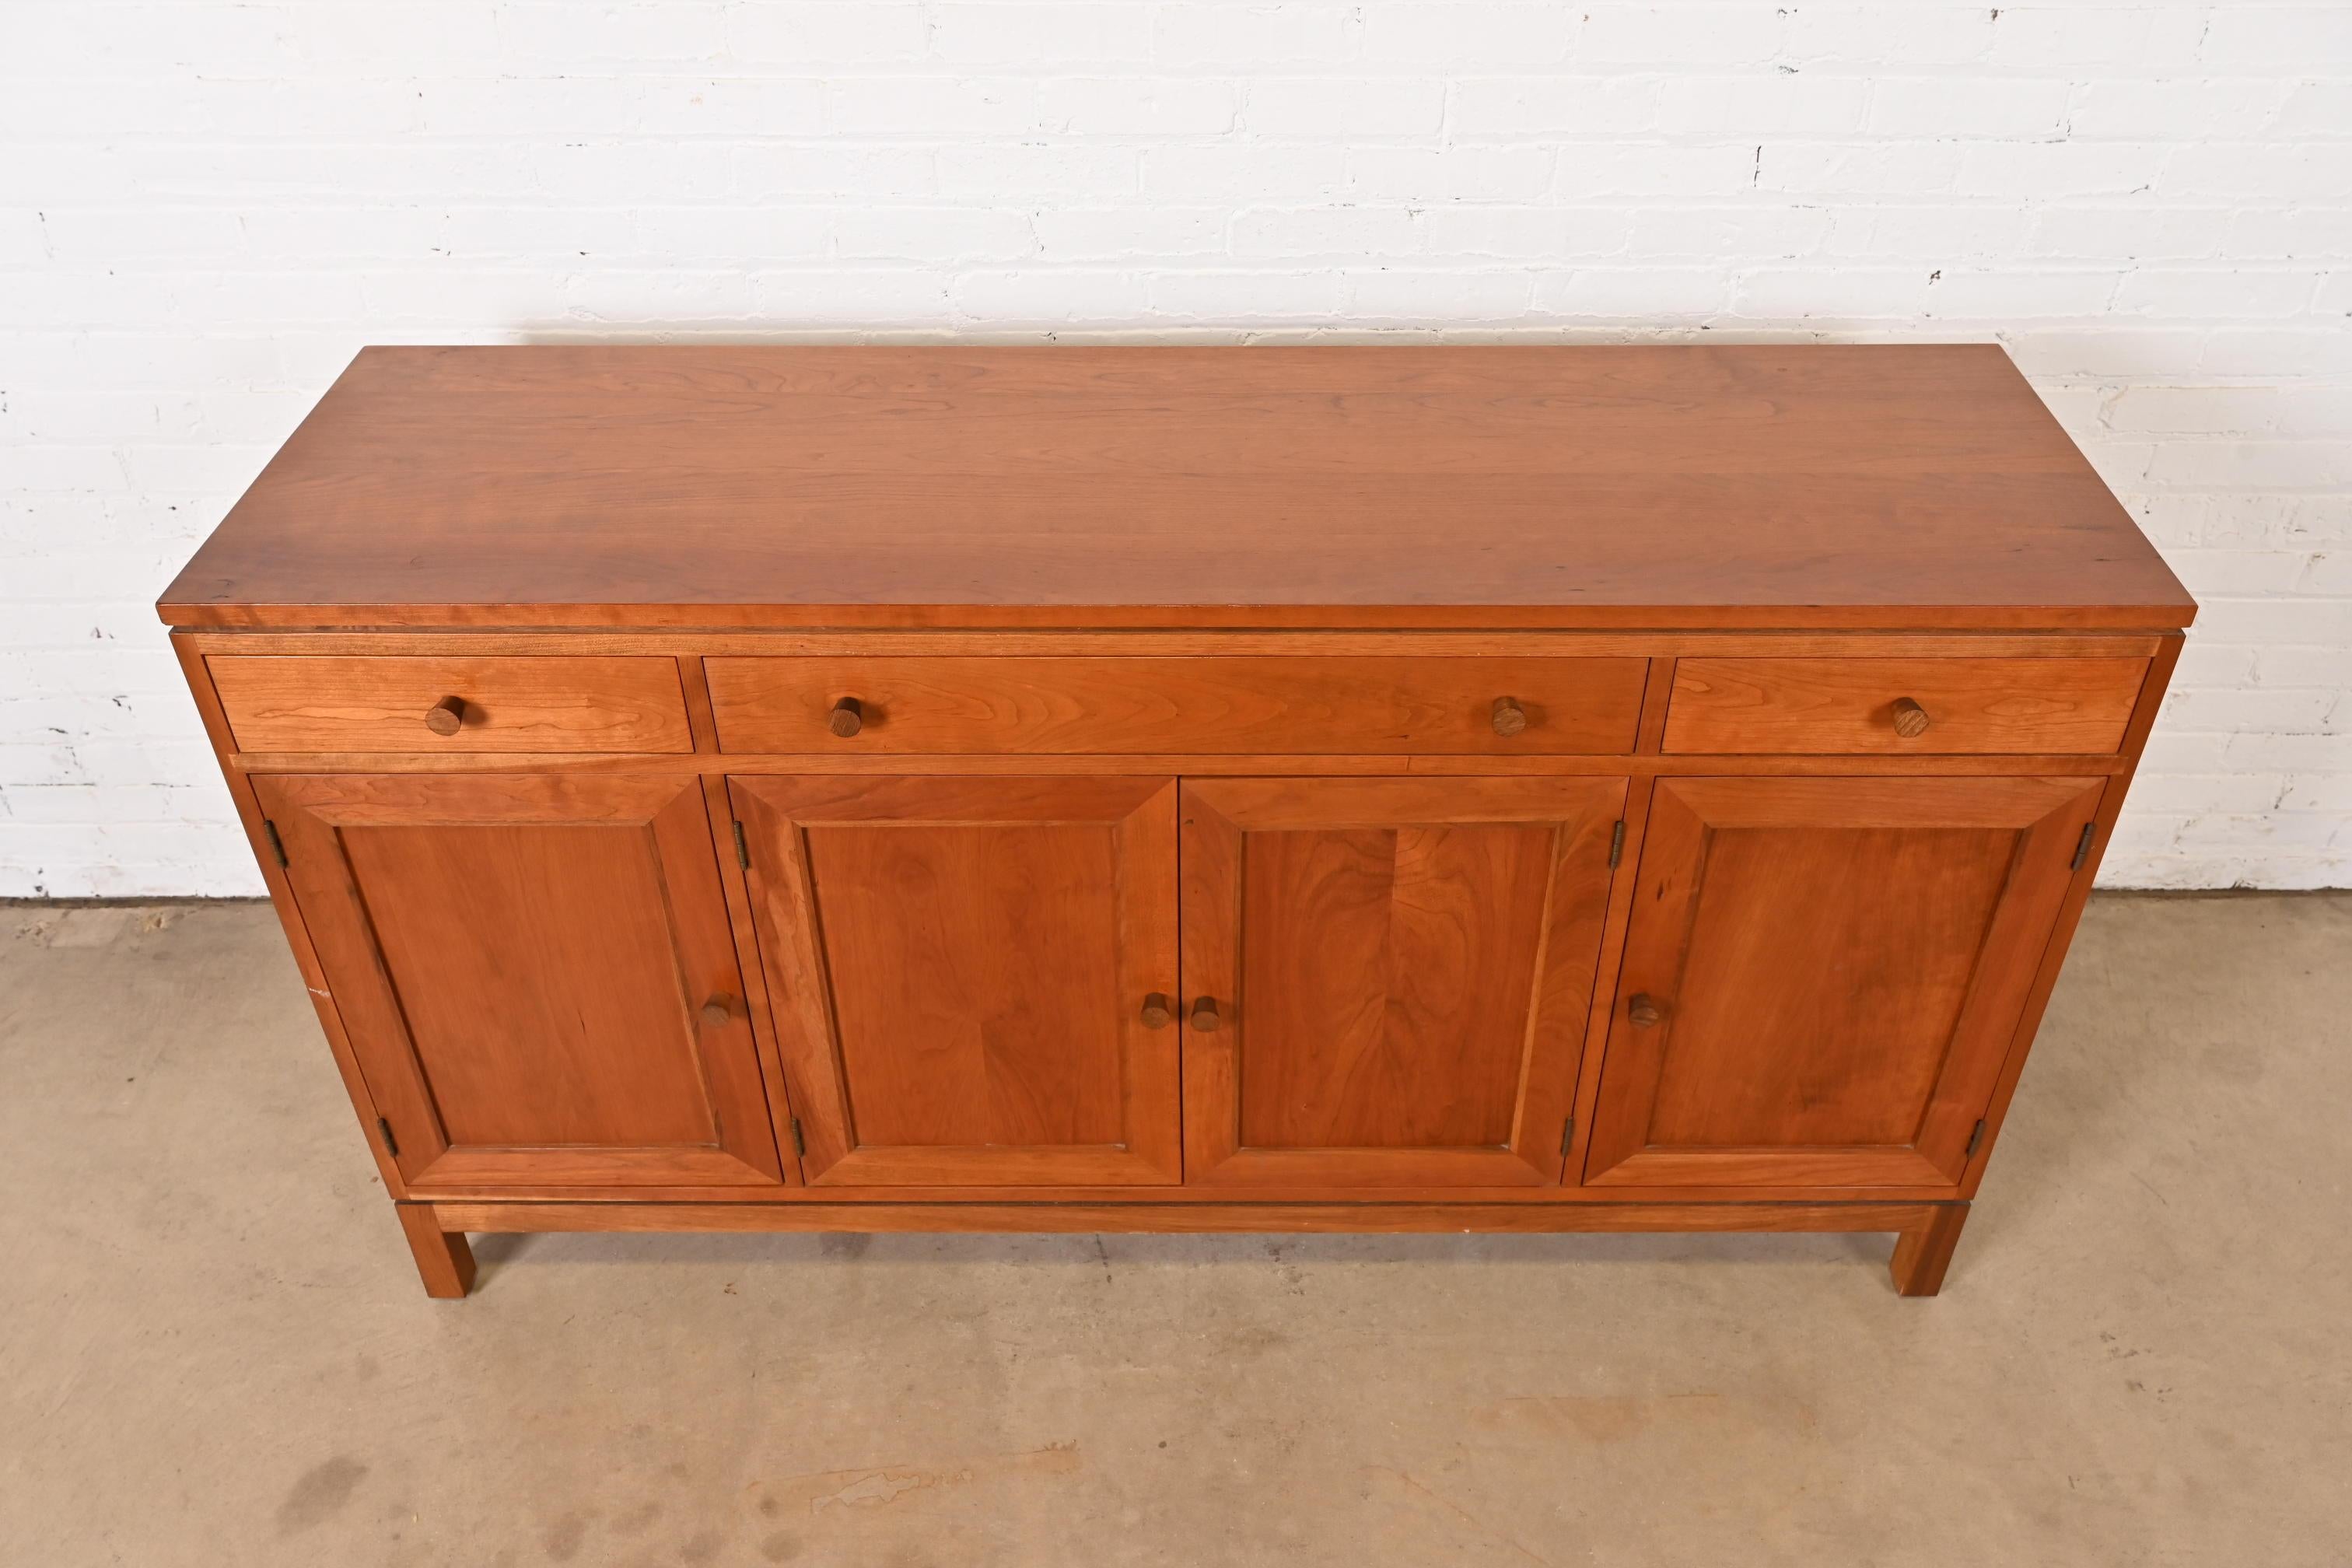 Stickley Arts & Crafts Shaker Cherry Wood Sideboard or Bar Cabinet For Sale 8